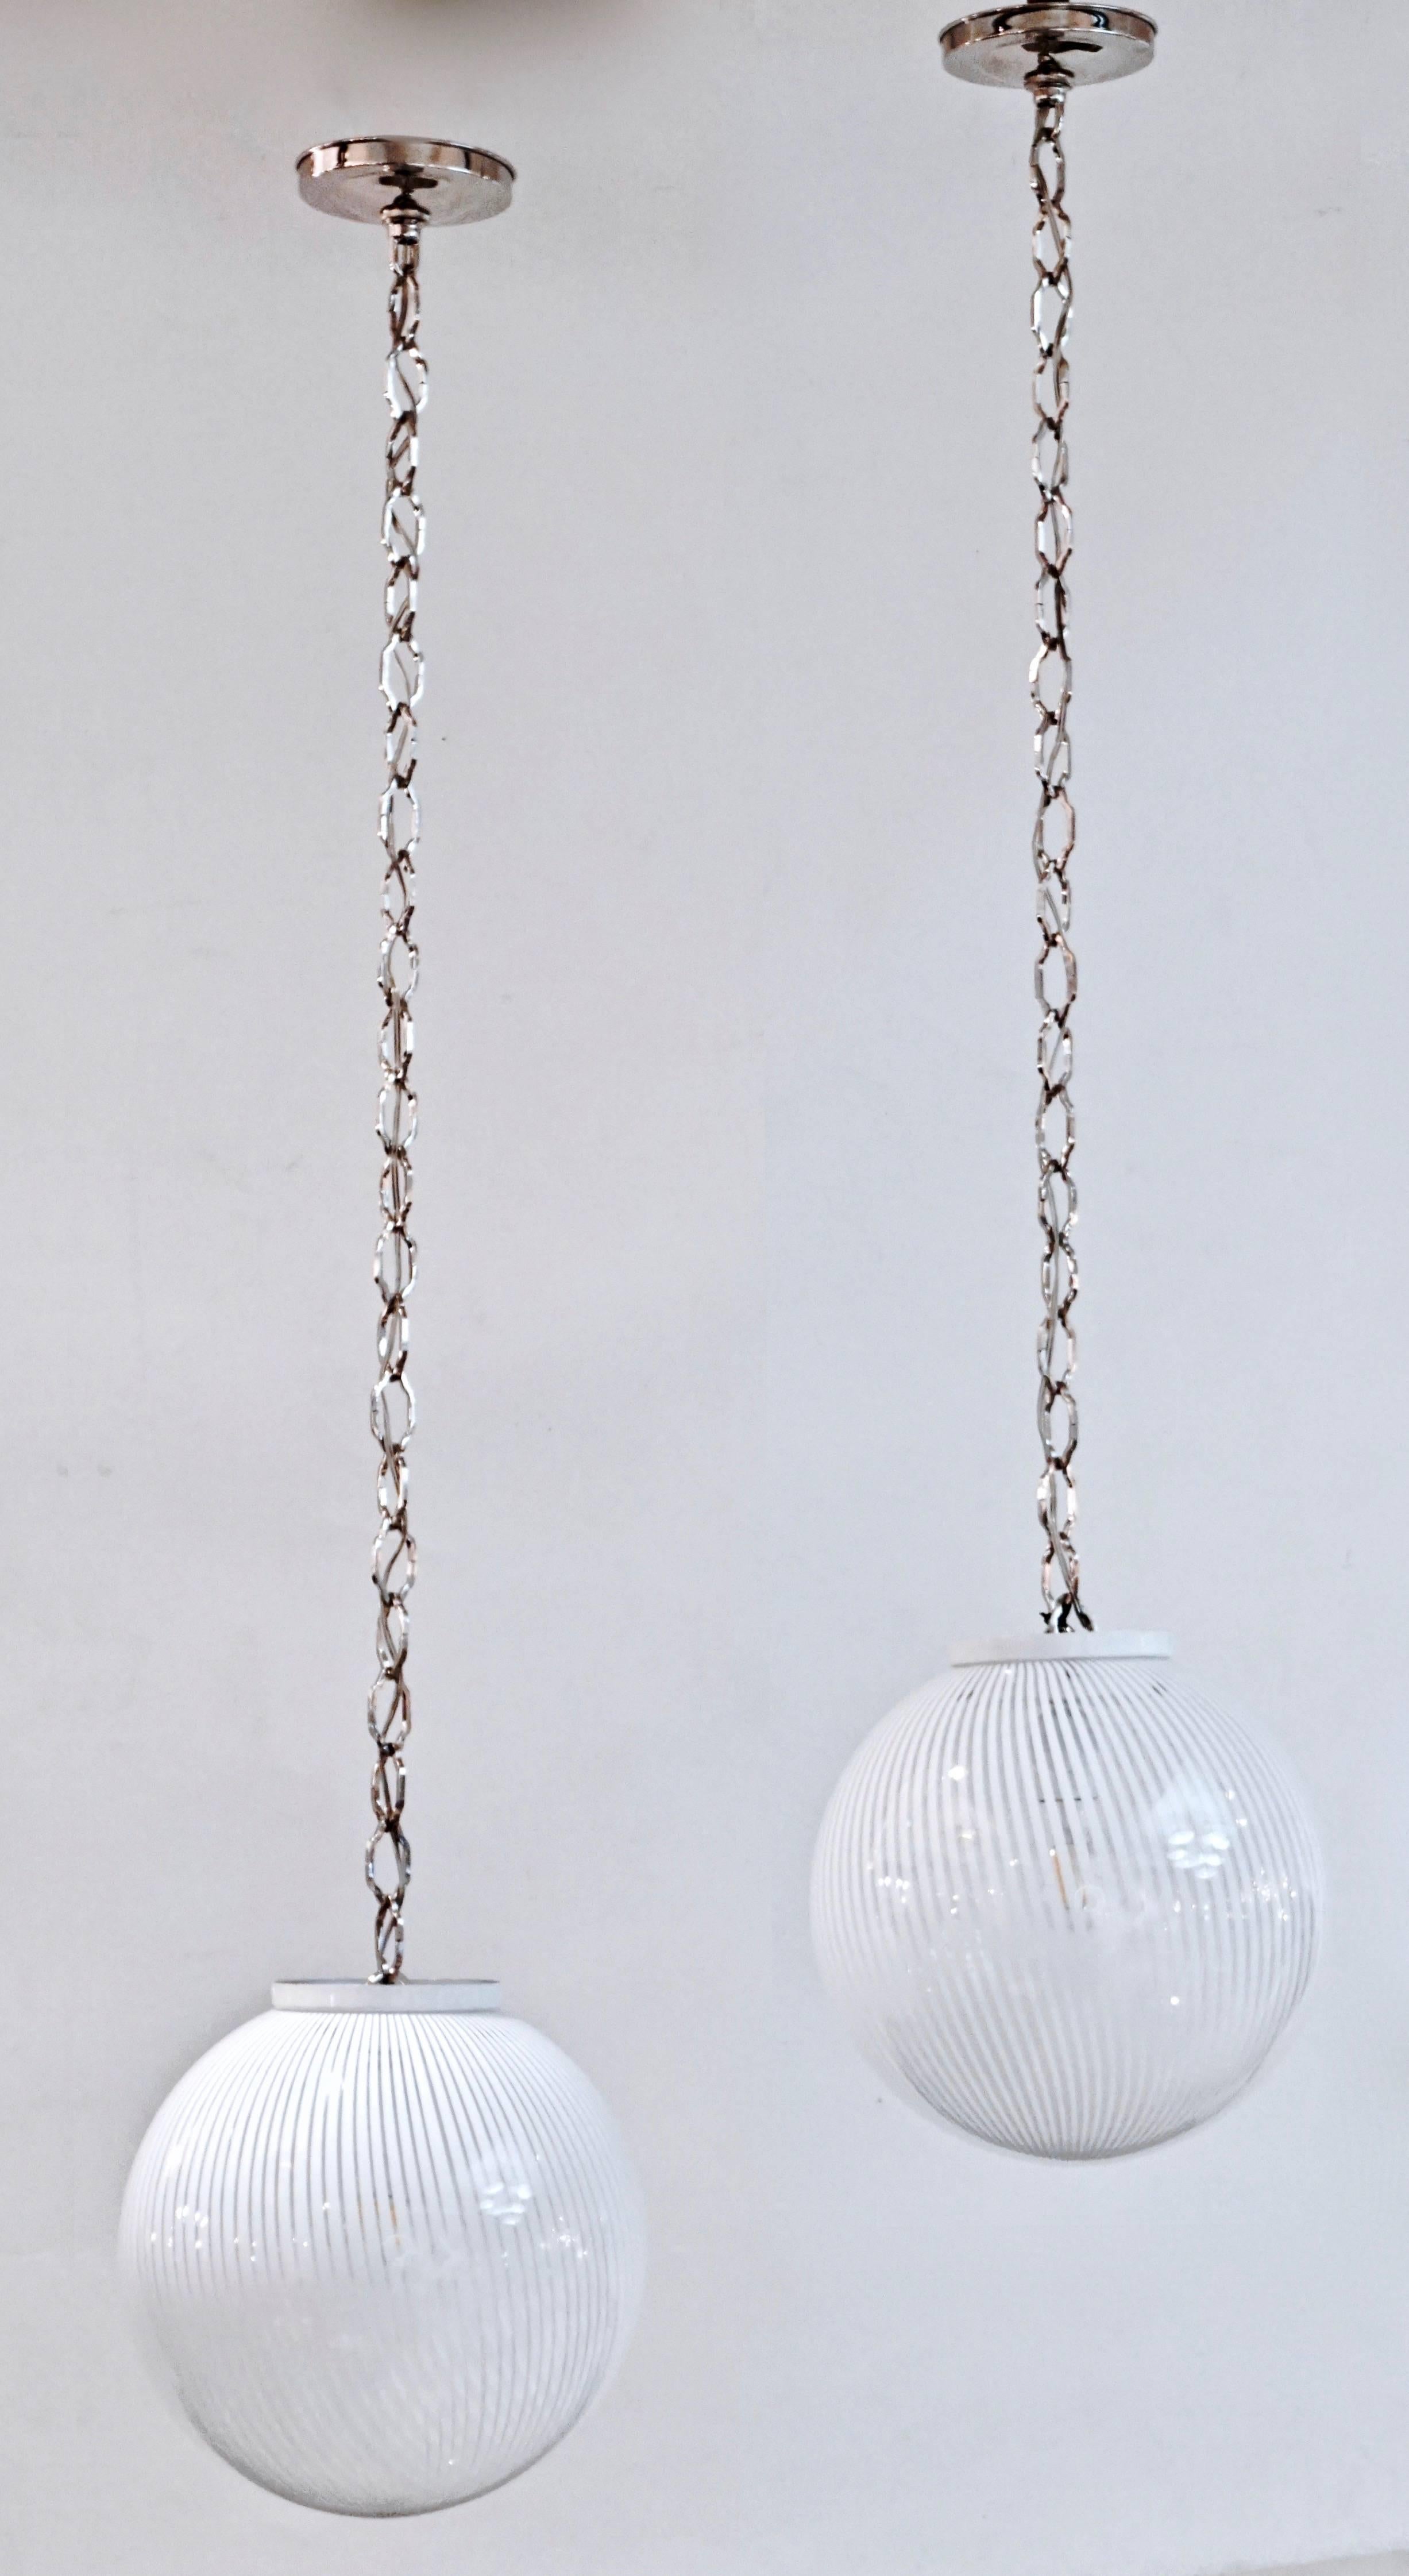 A pair of 1970s Venetian organic globe pendants by Ludovico Diaz de Santillana blown by Venini, in Minimalist clear Murano glass worked with perfect white filigrana, finished with a white lacquered metal round cover, hanging on a nickel chain with